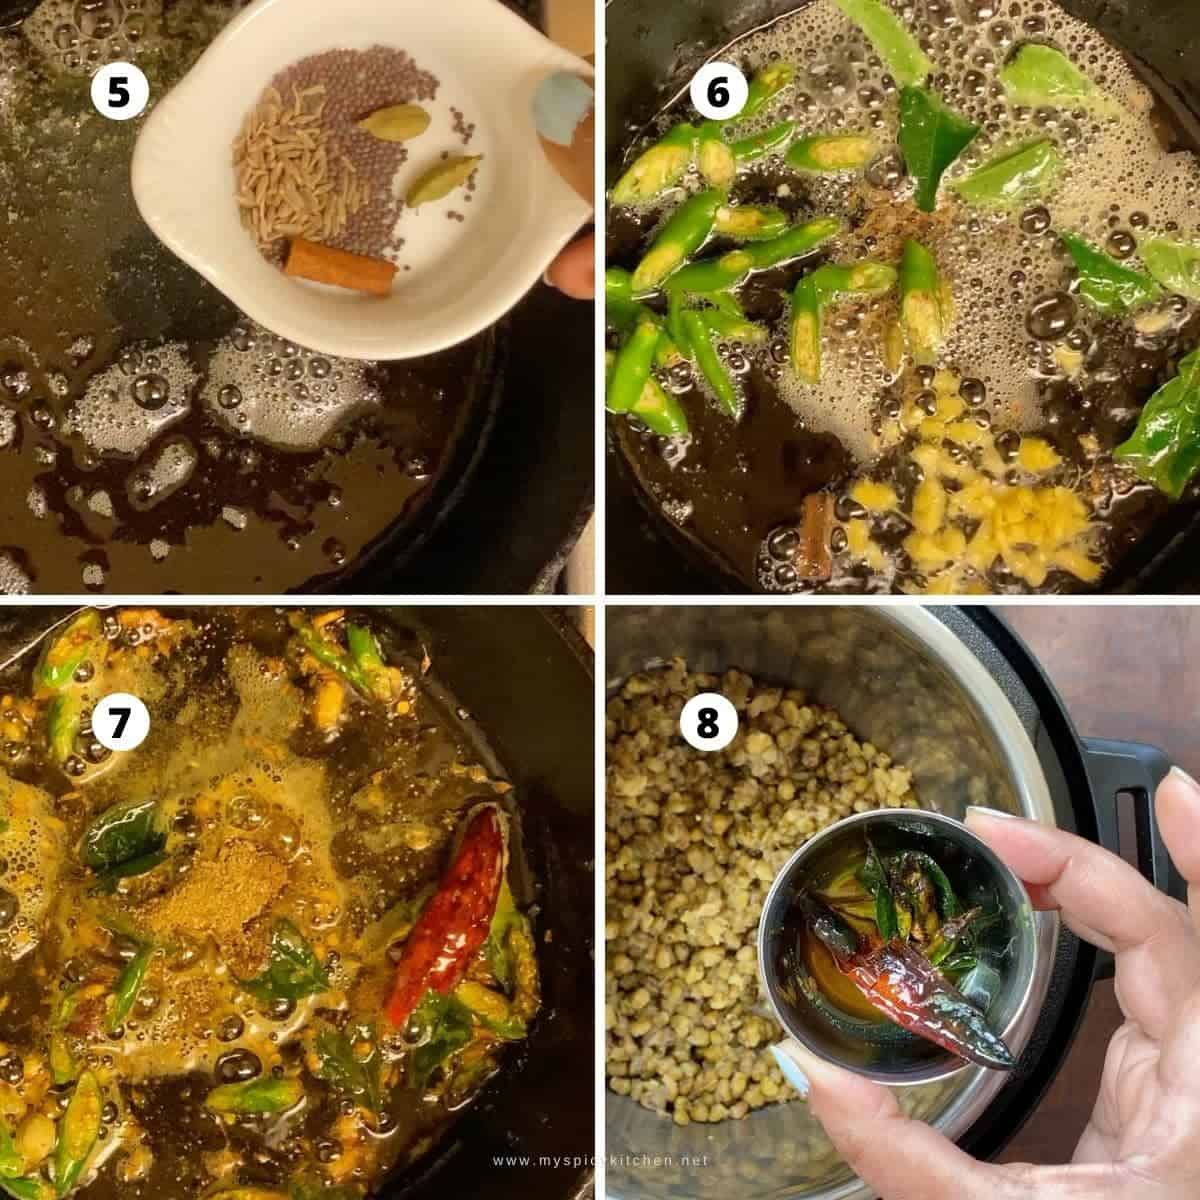 Step by step collage of moong beans curry; pic 5 - whole spices and pan with oil to prepare tadka, pic 6 - green chilies curry leaves & ginger in the pan,, pic - spice powders added too pan and pic 8 - some tadka in a bowl.